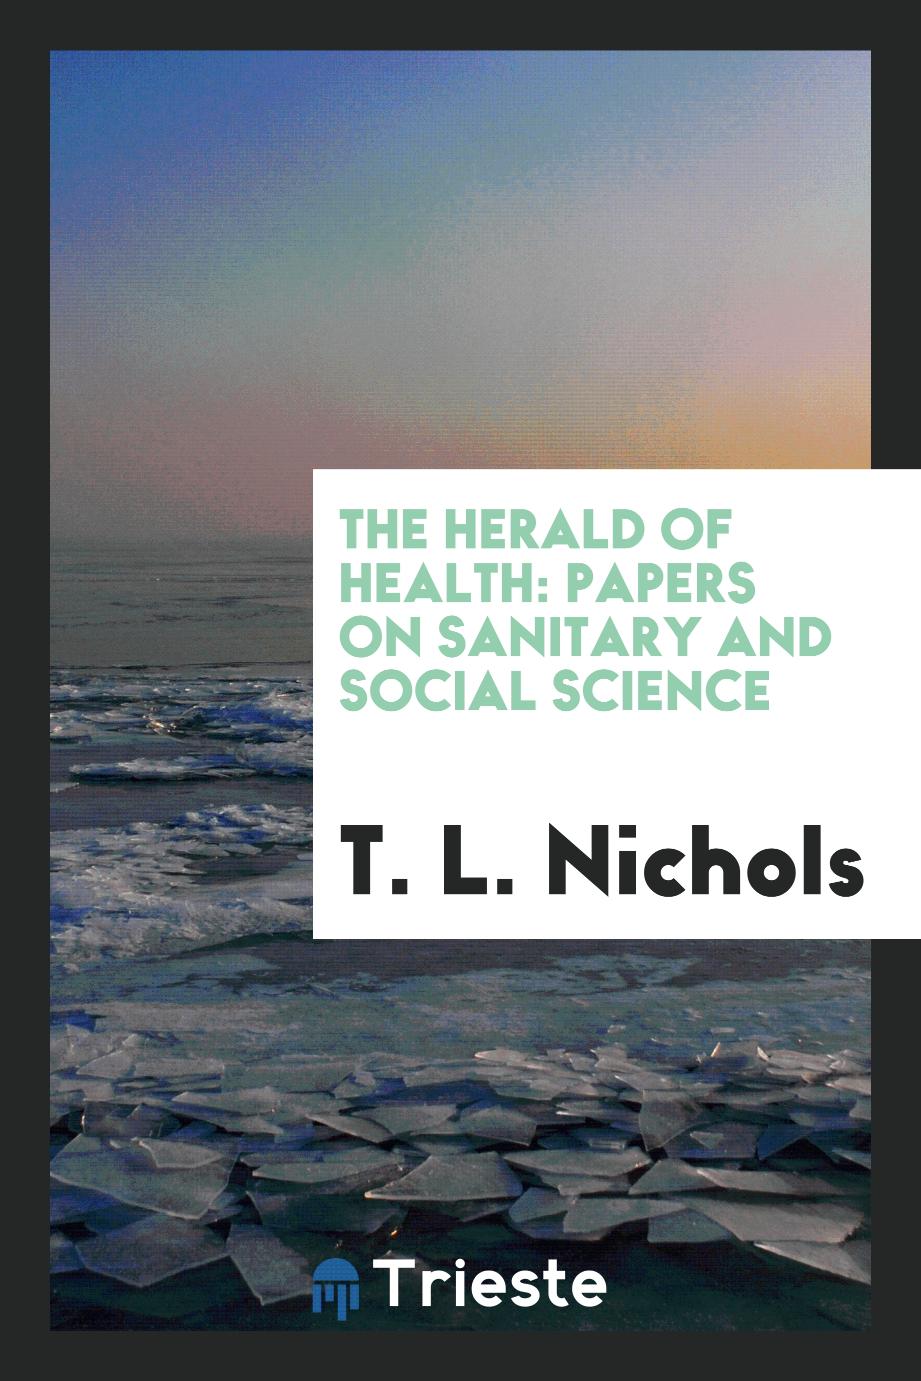 The Herald of Health: Papers on Sanitary and Social Science